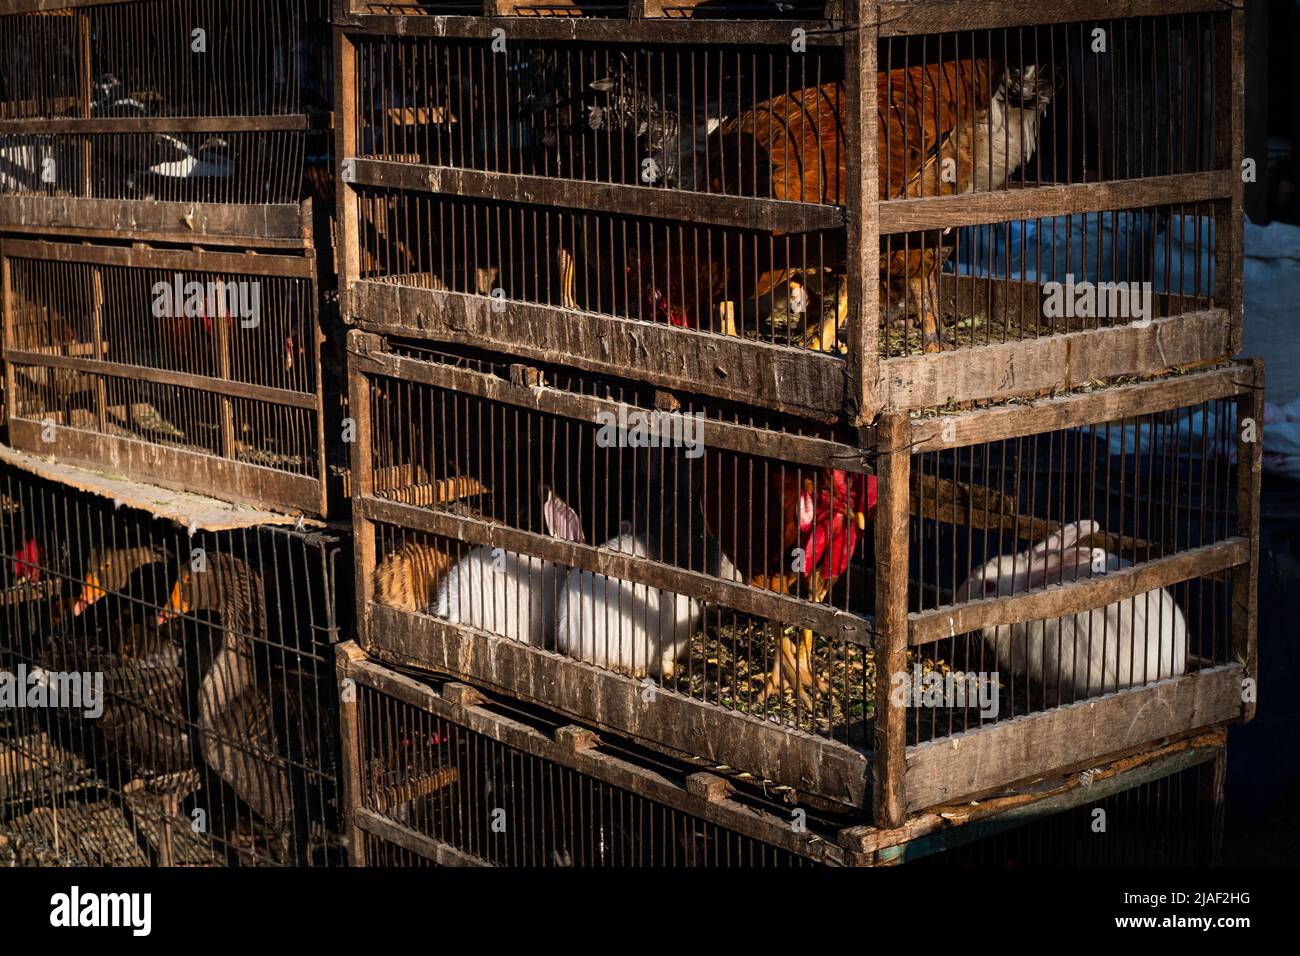 Animals in cages on street market Stock Photo